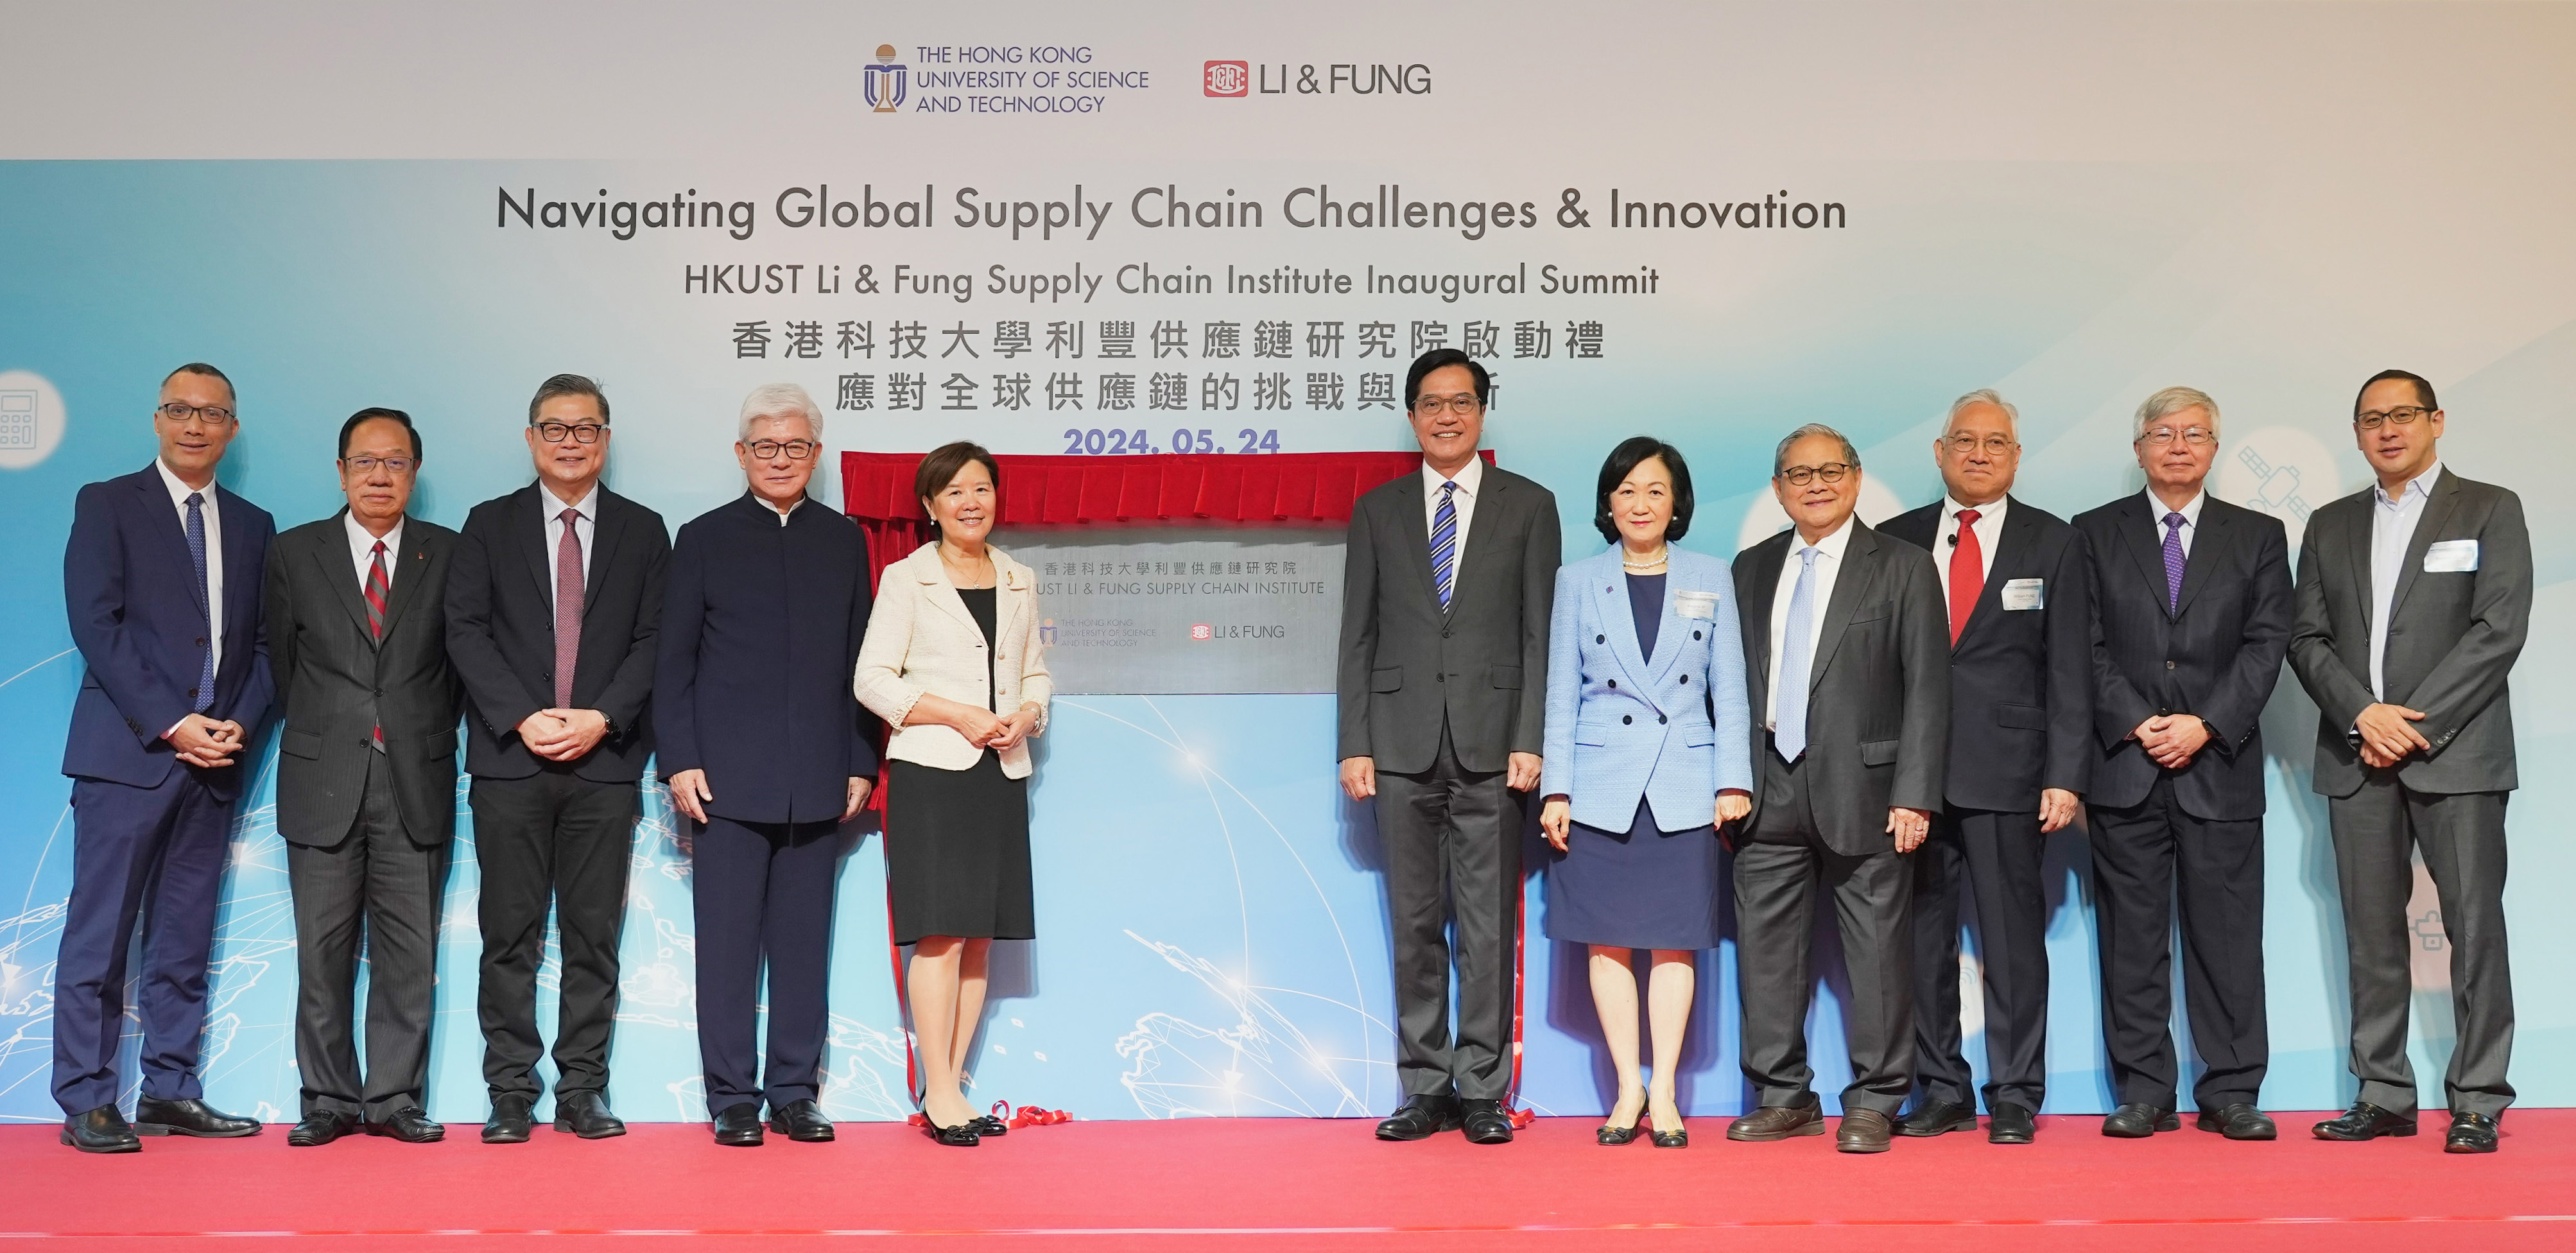 A group photo of Mr. Michael Wong Wai-Lun (sixth right); Mrs. Regina IP, Convenor of the Non-official Members of the ExCo, and LegCo Member (fifth right); Prof. Nancy Ip (fifth left); Dr. Victor Fung (fourth right); Dr. Vincent Lo (fourth left); Dr. William Fung (third right); Prof. Tam Kar-Yan (third left); Prof. Hau Lee (second right); Prof. Albert IP, HKUST Foundation Chairman (second left); Mr. Spencer Fung (first right) and Prof. Qing LI (first left).